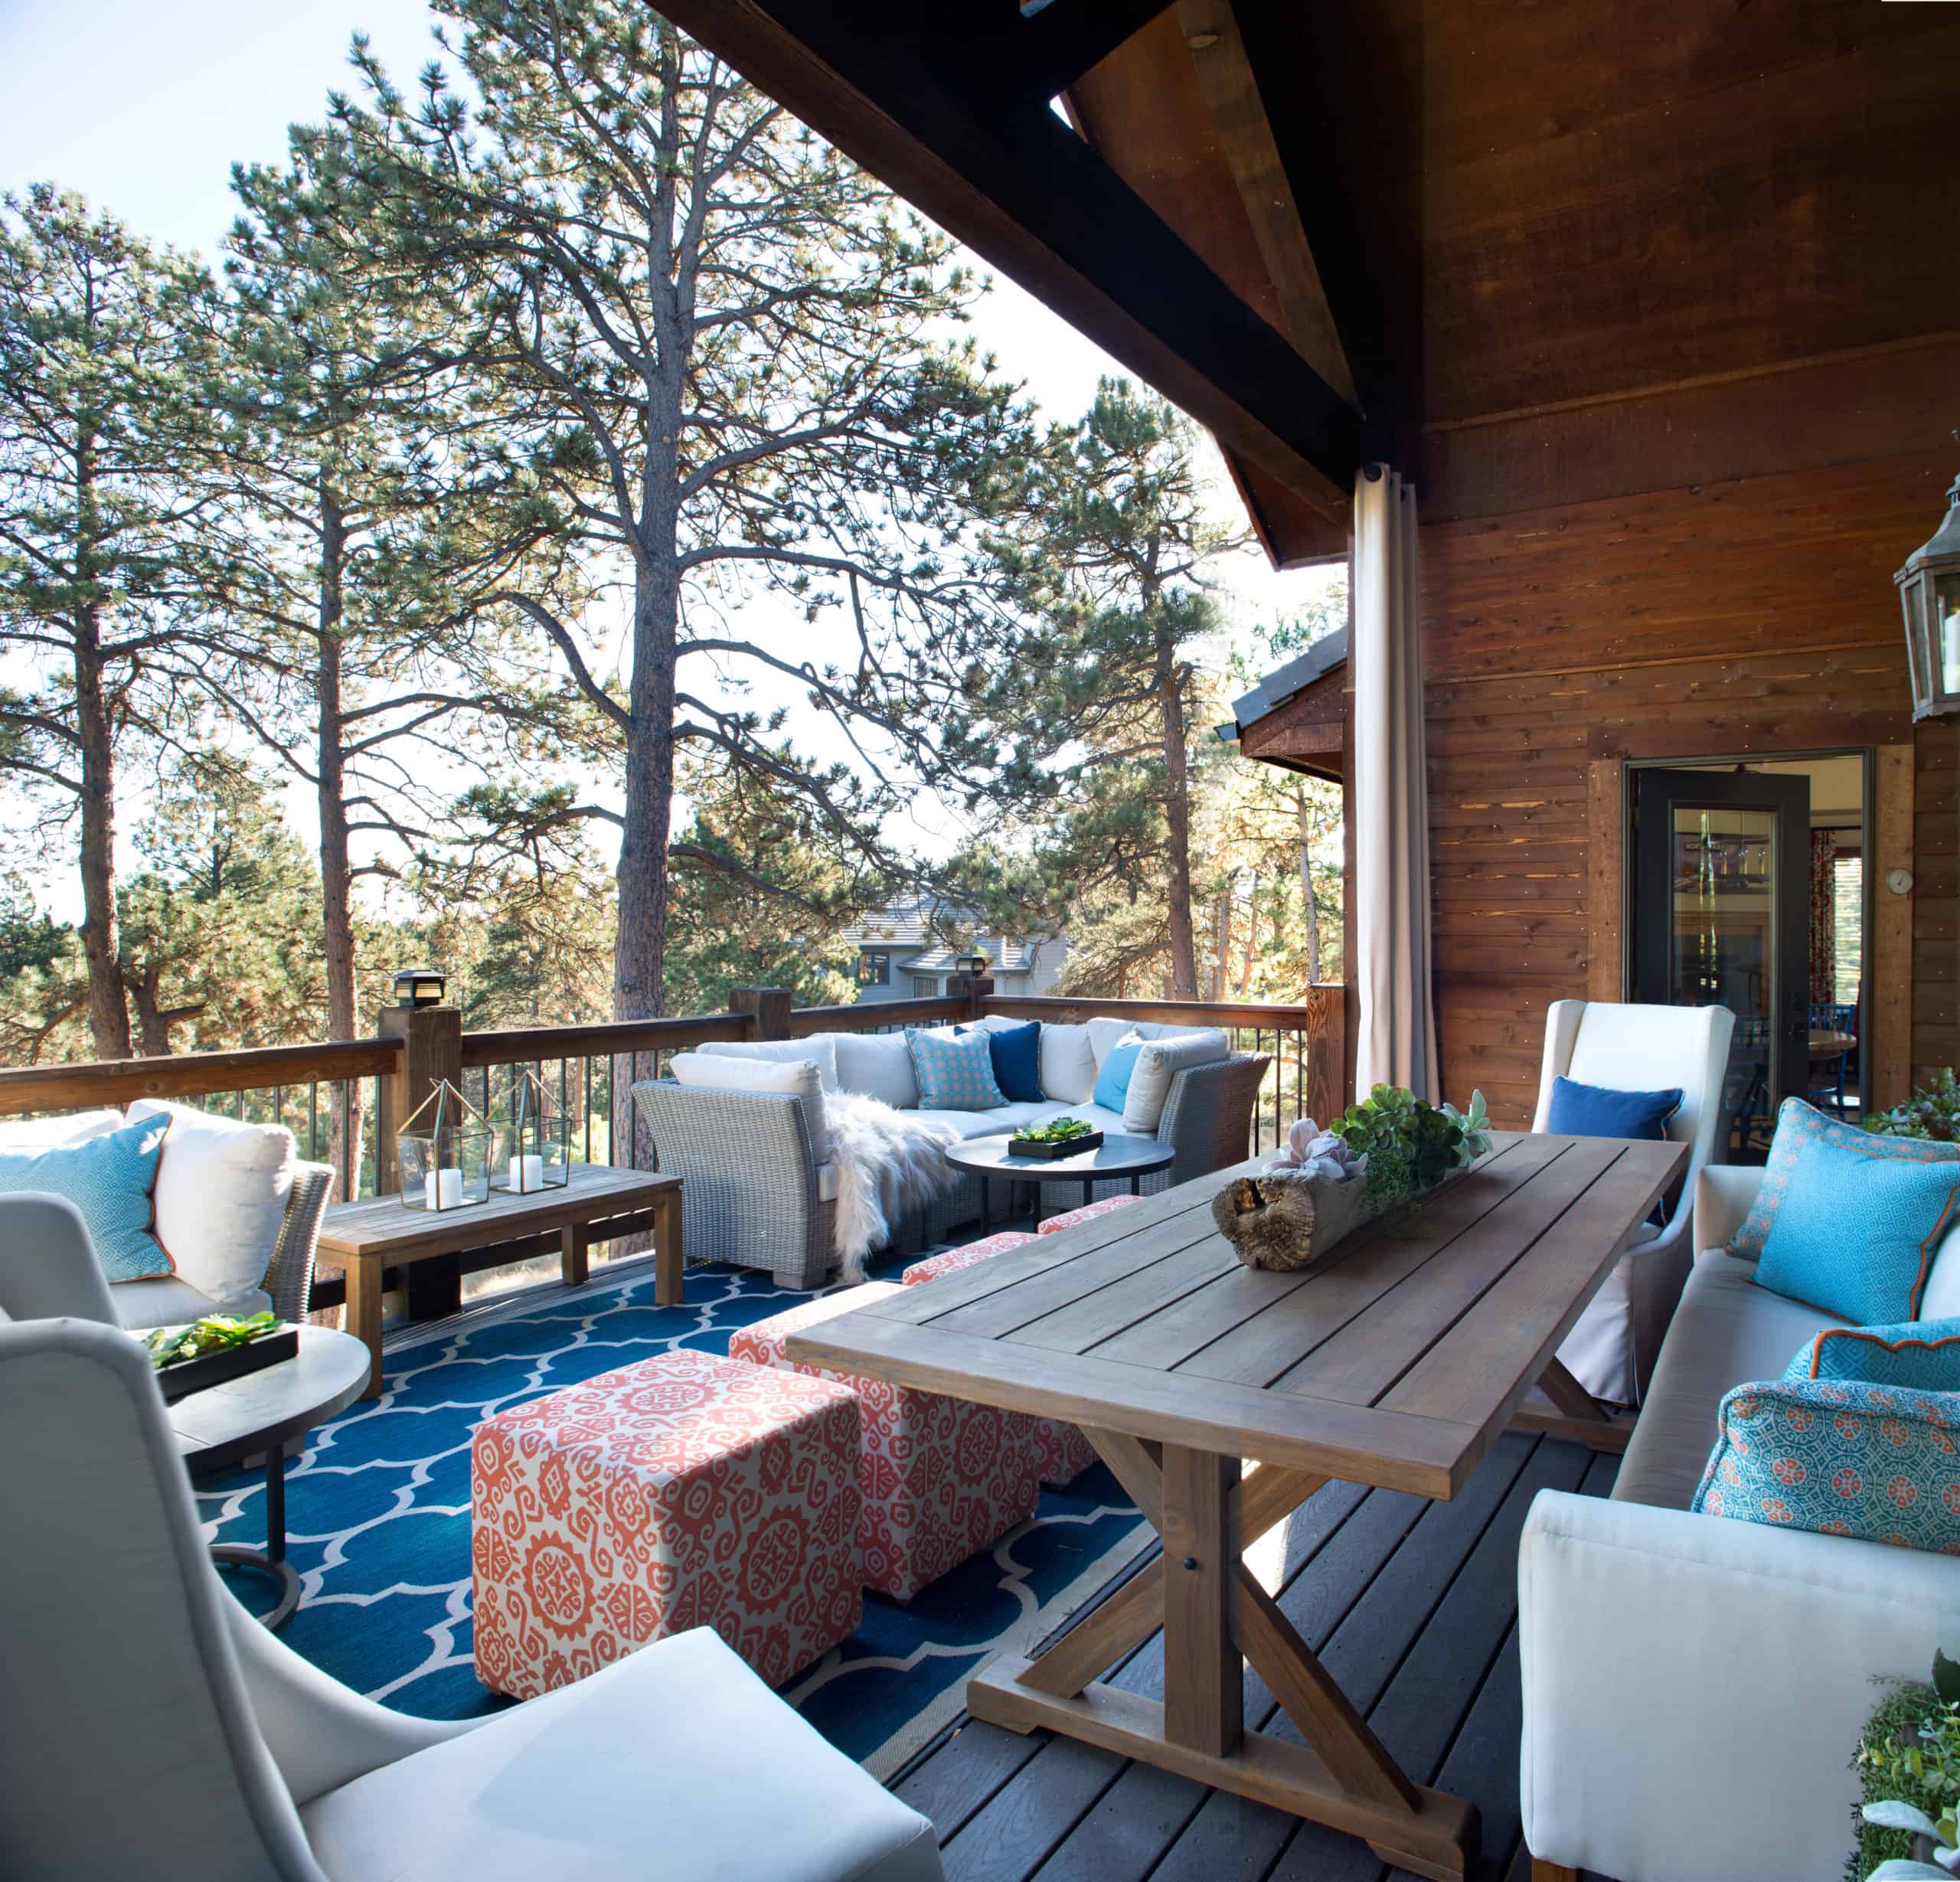 Beauty in the trees large deck furnishings by amazing interior designer